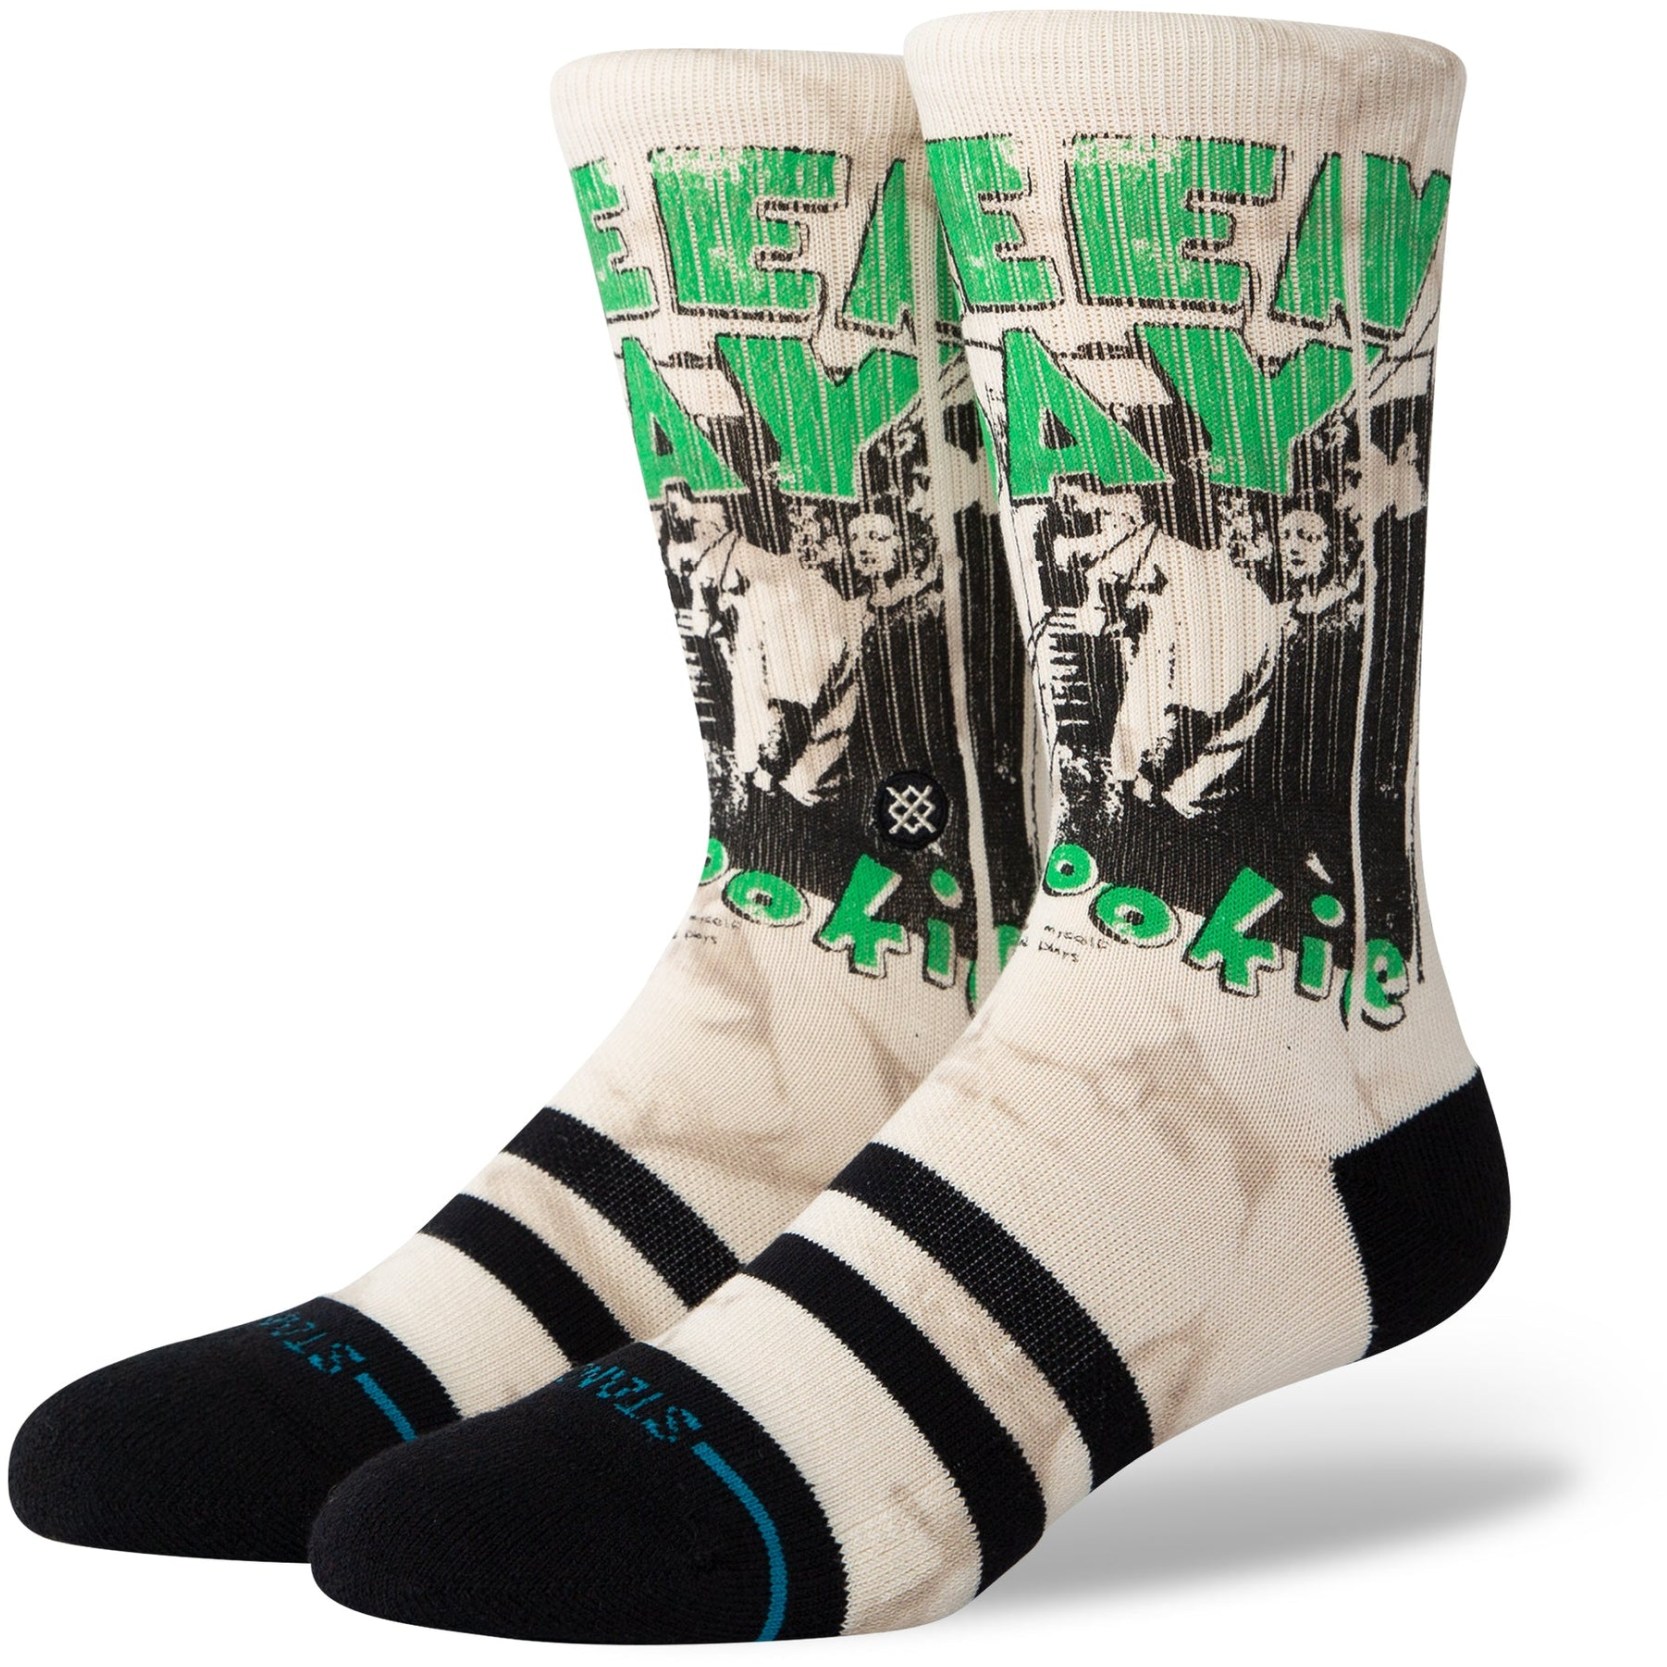 Picture of Stance 1994 Crew Socks Unisex - offwhite